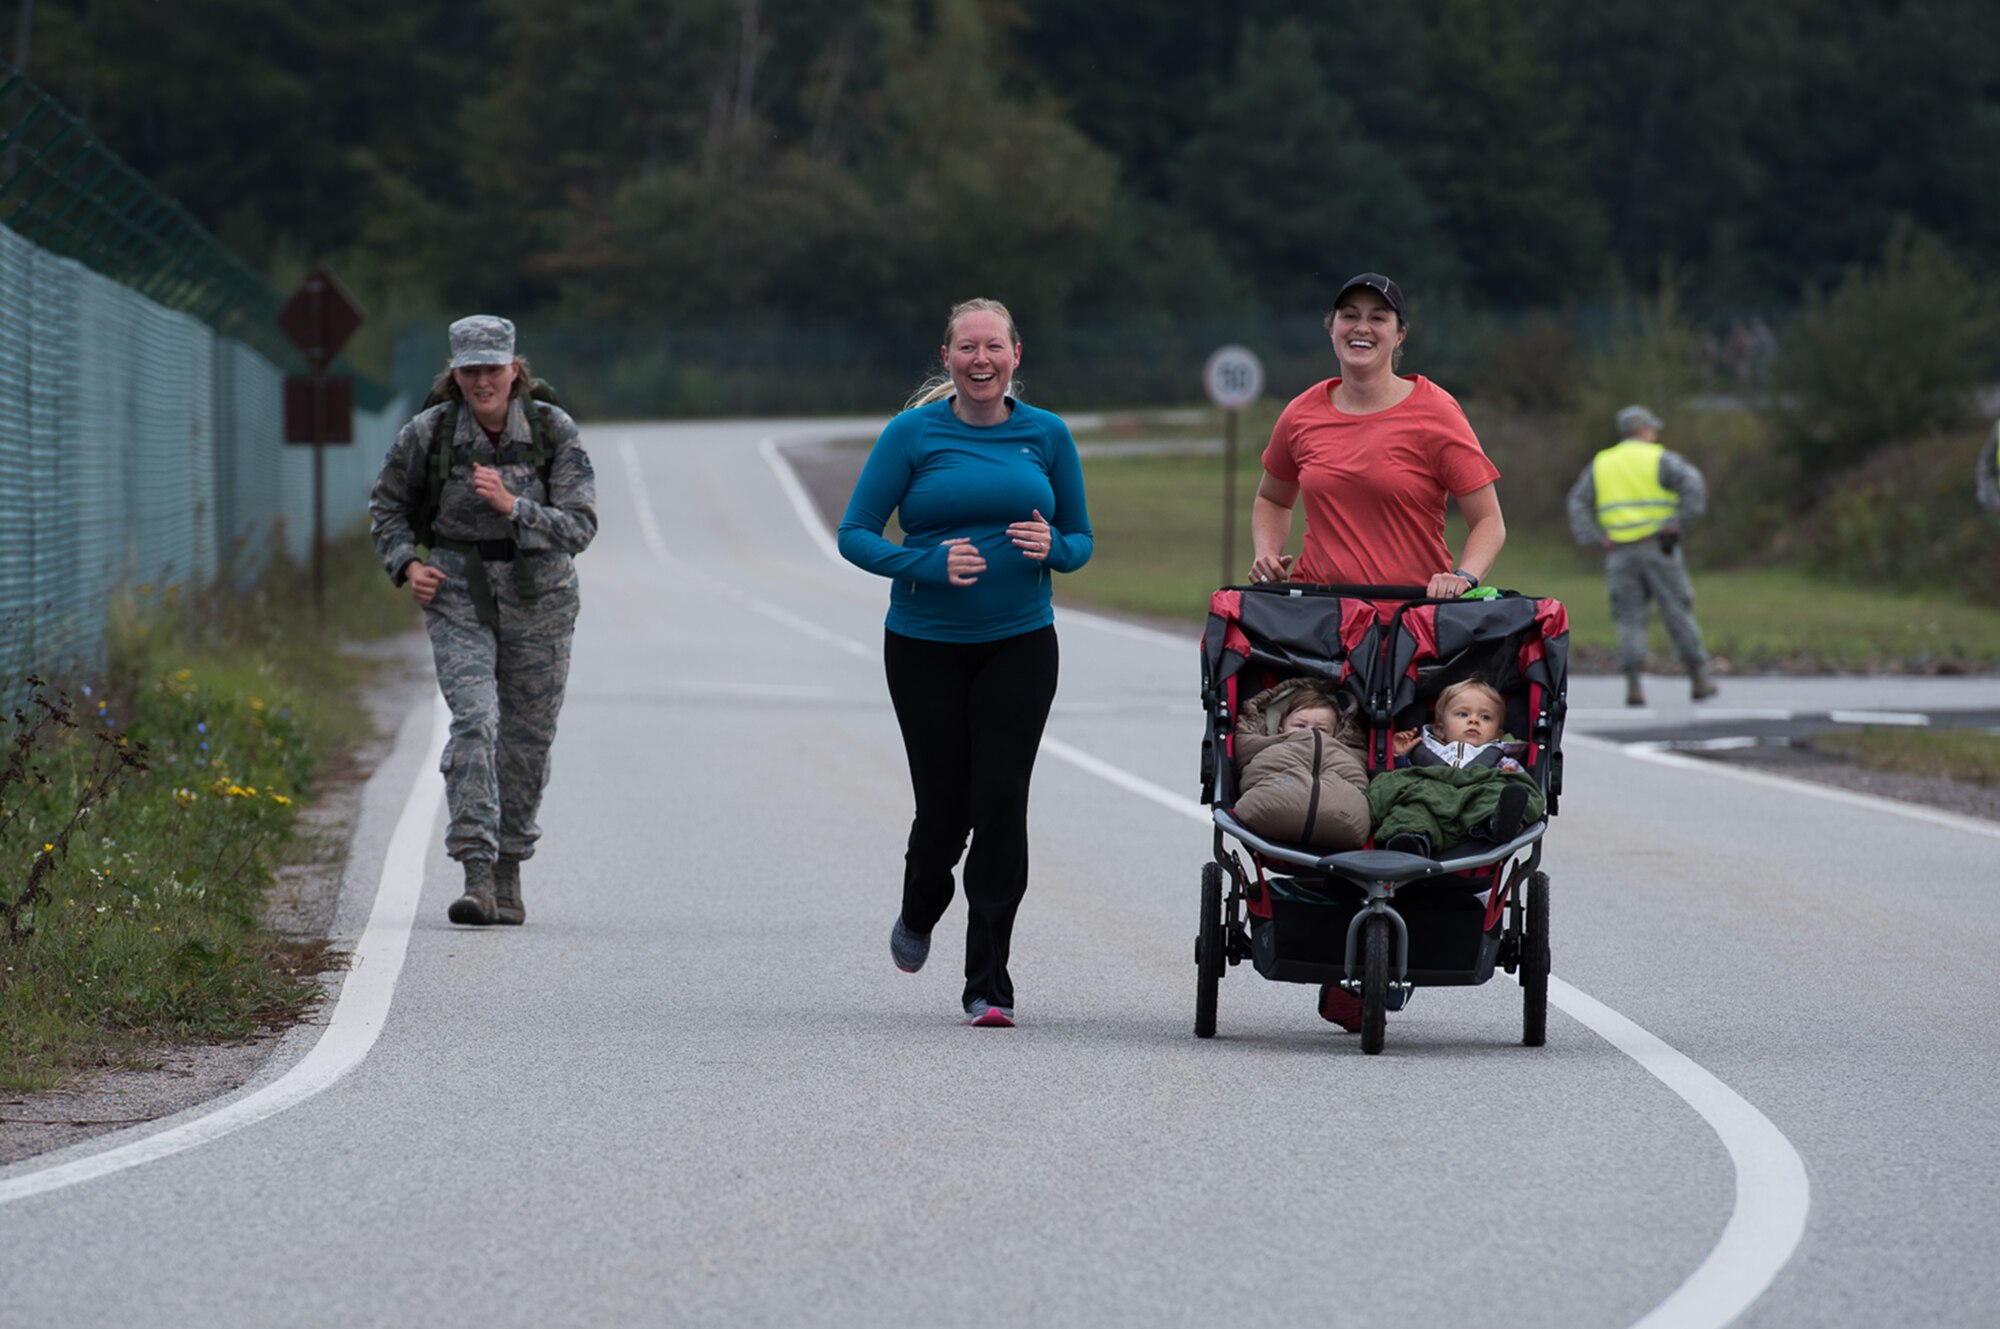 Members of the Kaiserslautern Military Community run for the National Preparedness Month 5k Run on Ramstein Air Base, Germany, Sept. 29, 2017. This year’s overarching theme was, “Disasters don’t plan ahead. You can.” (U.S. Air Force photo by Airman 1st Class Devin M. Rumbaugh)